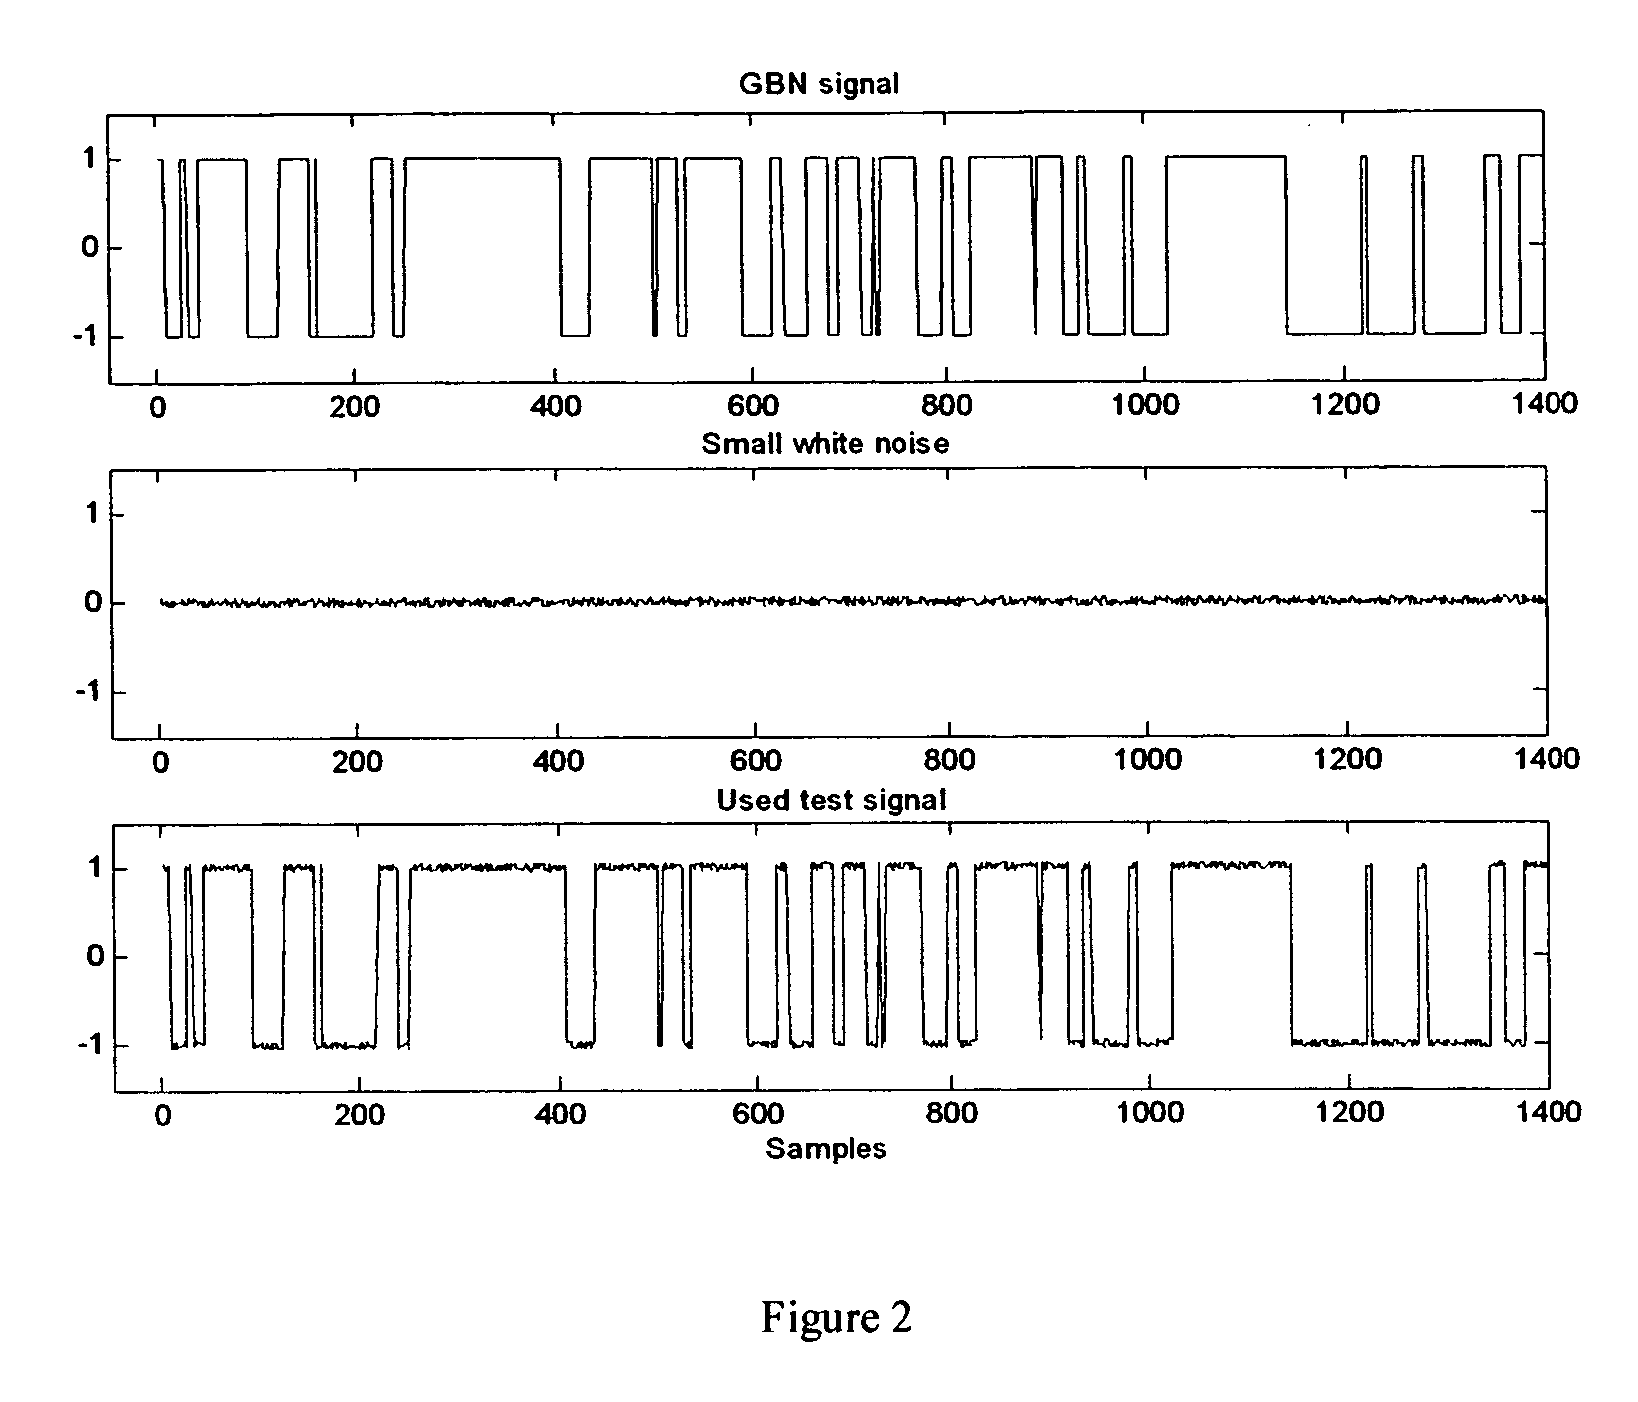 Computer method and apparatus for online process identification